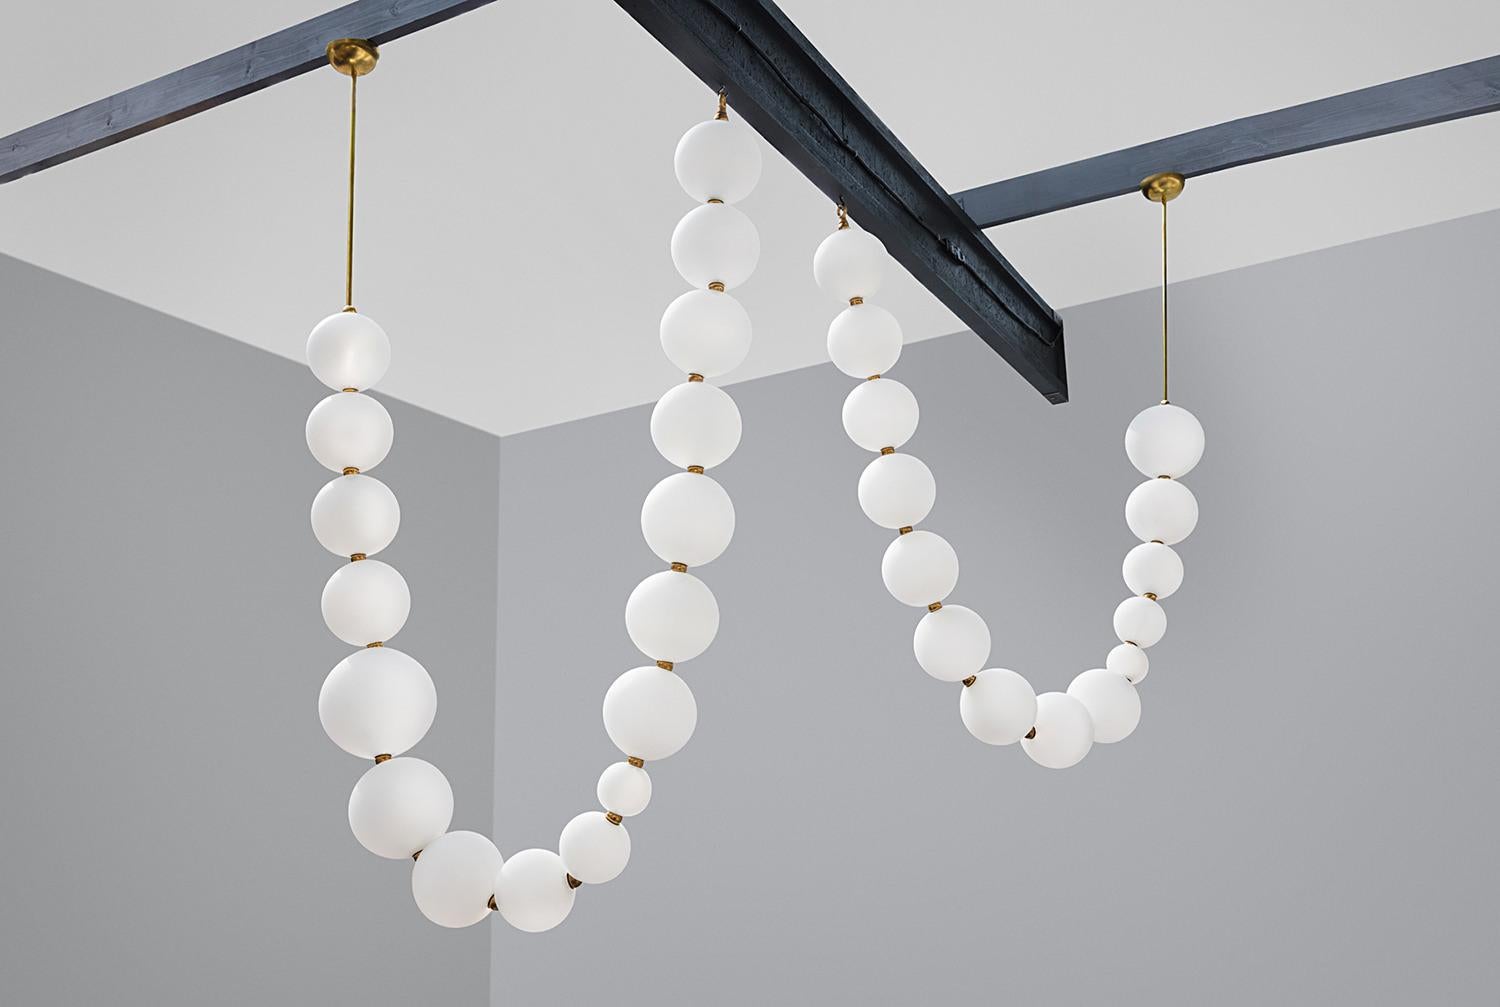 Pair of pearl necklace pendant lights - Ludovic Clément d’Armont
Every creation of Ludovic Clément d’Armont can be made to order in any requested dimensions. Please contact us for custom-made creations.
Blown glass and brass
Dimensions of the